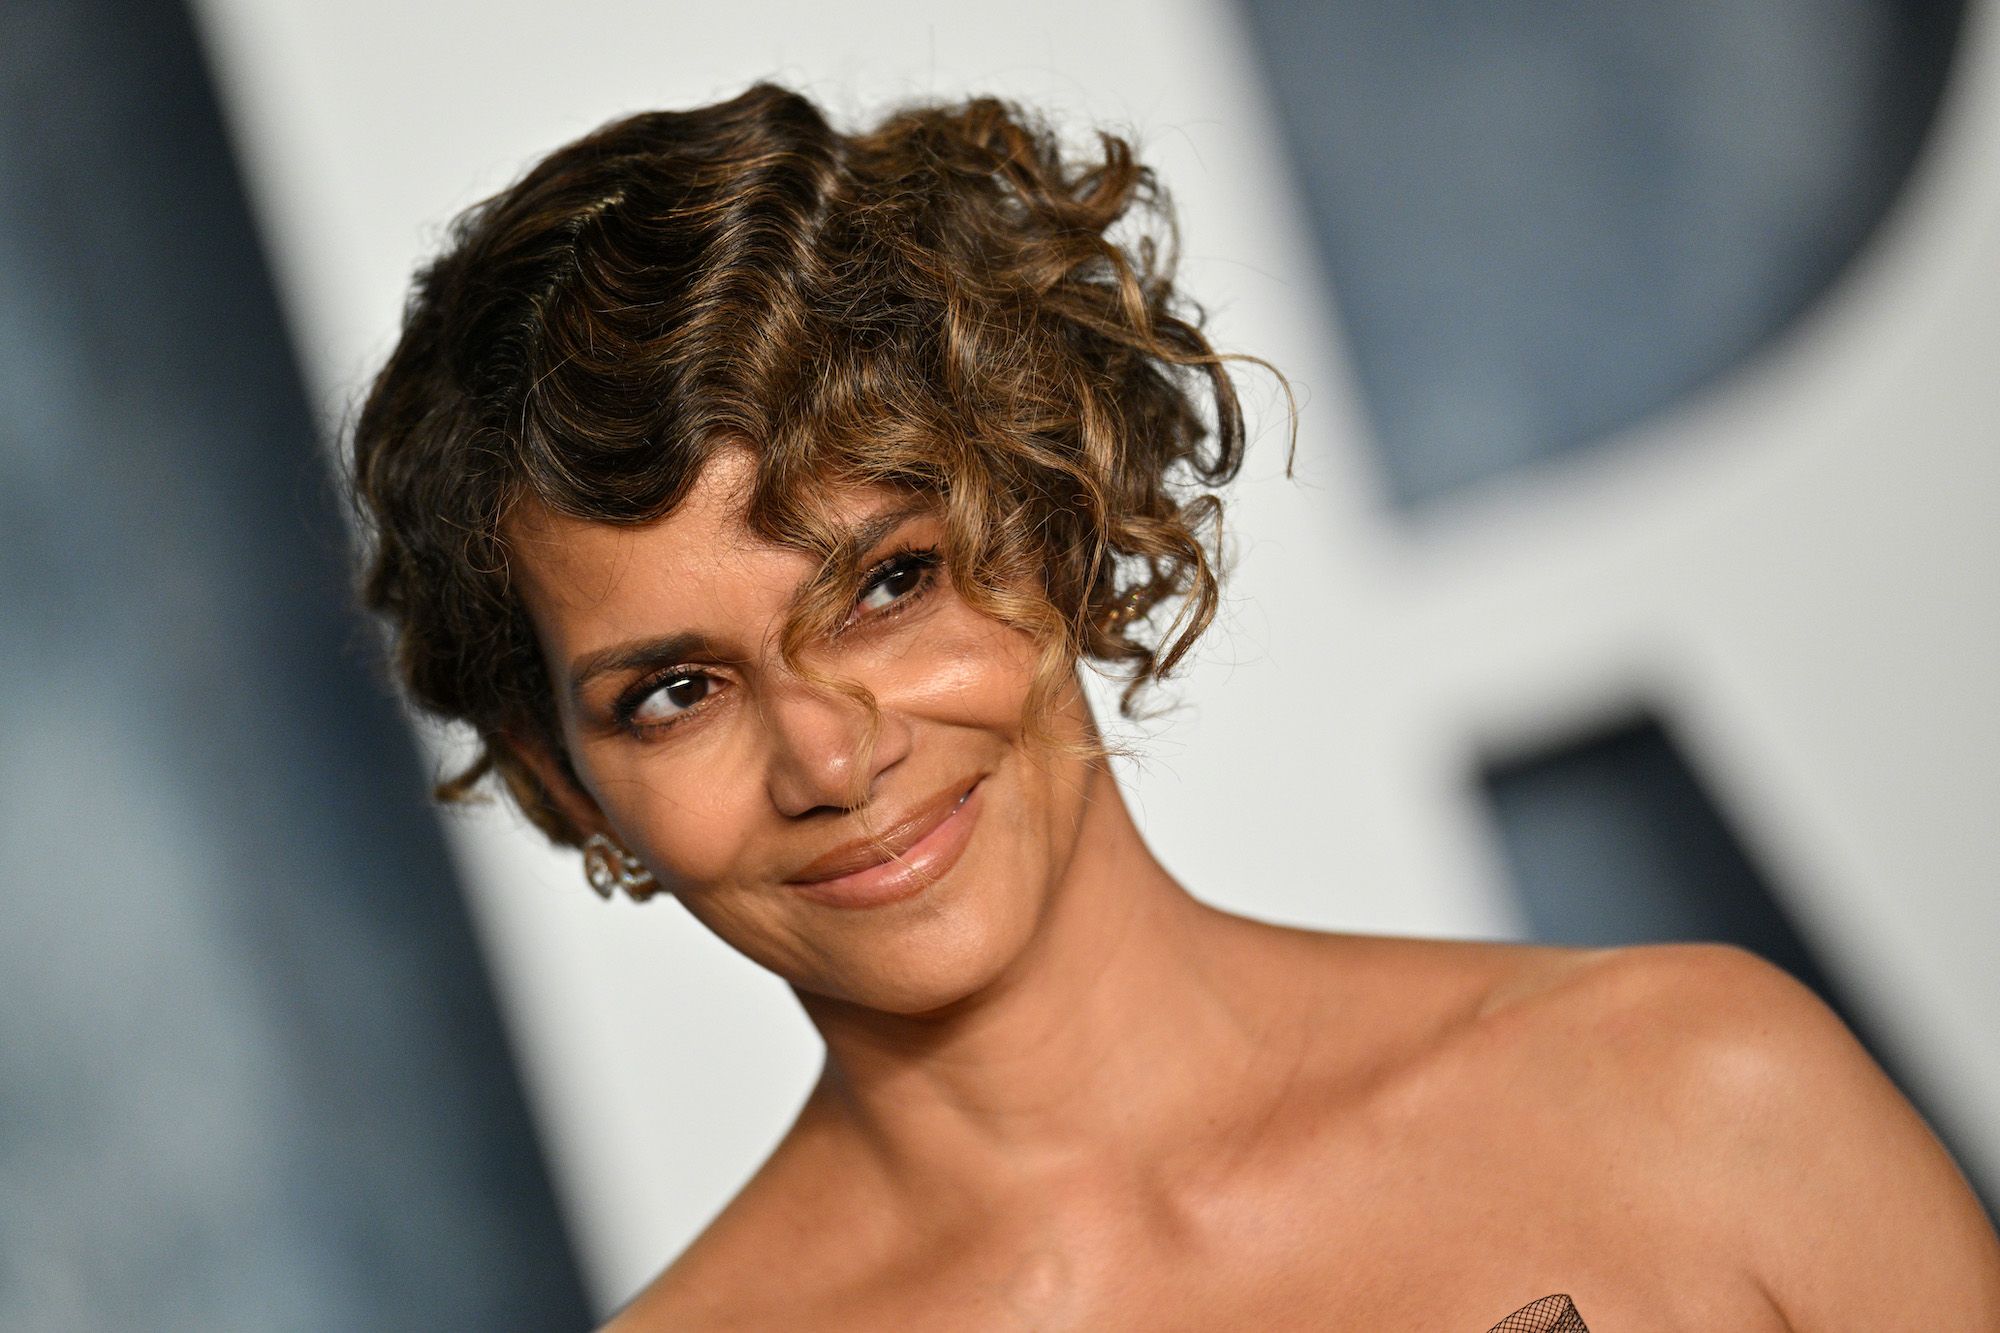 Halle Berry Poses Nude While Drinking Wine on Her Balcony In New